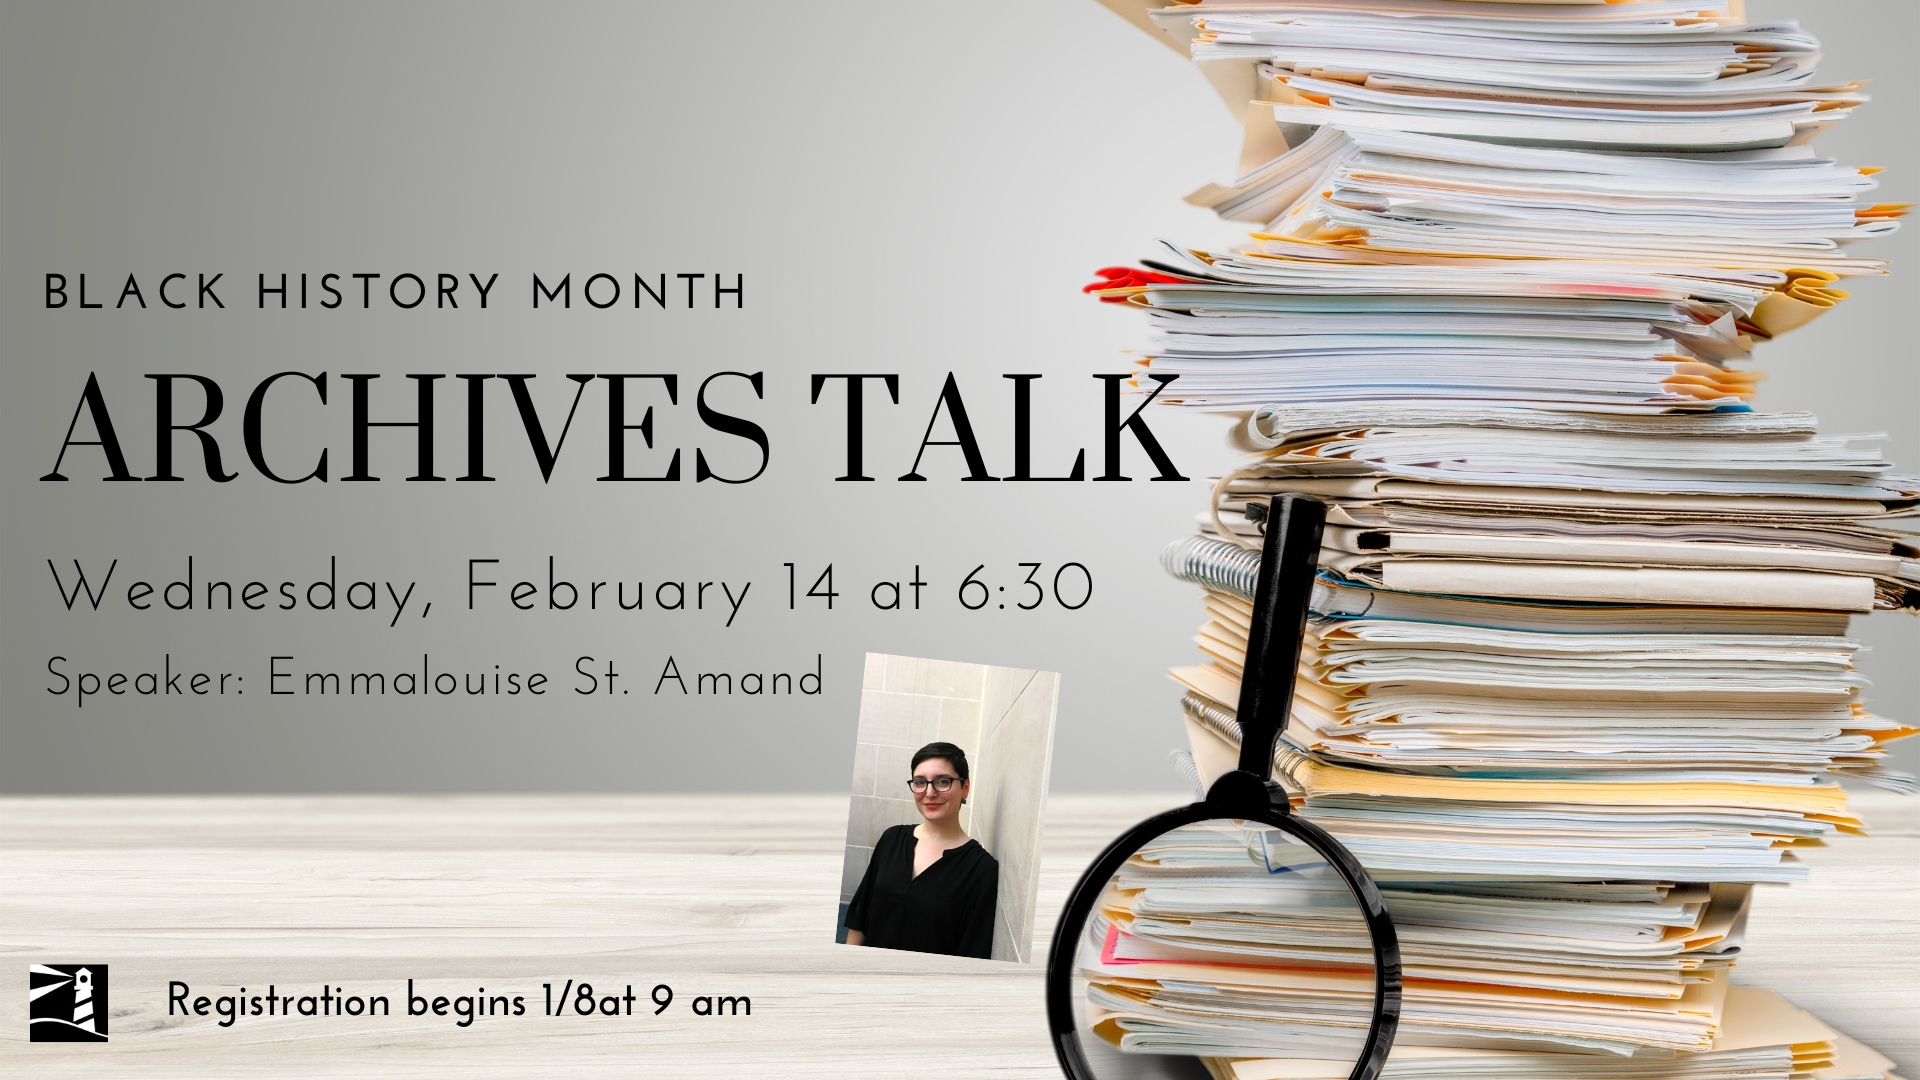 Archives talk on Wed. 2/14 at 6:30pm